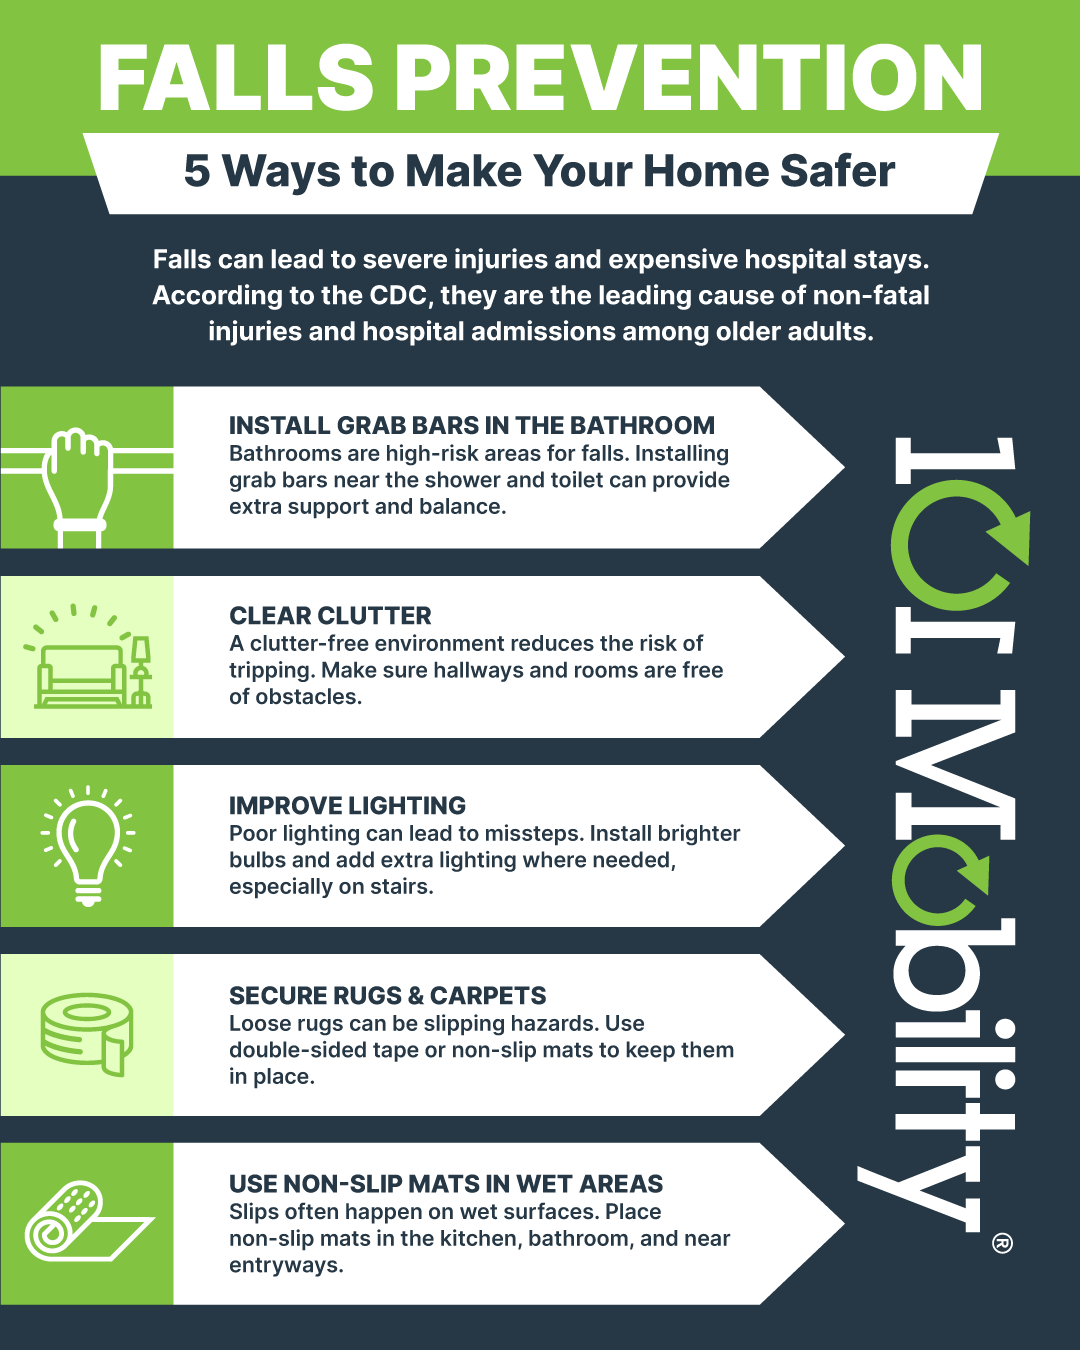 Infographic on Falls Prevention: 5 Ways to Make Your Home Safer